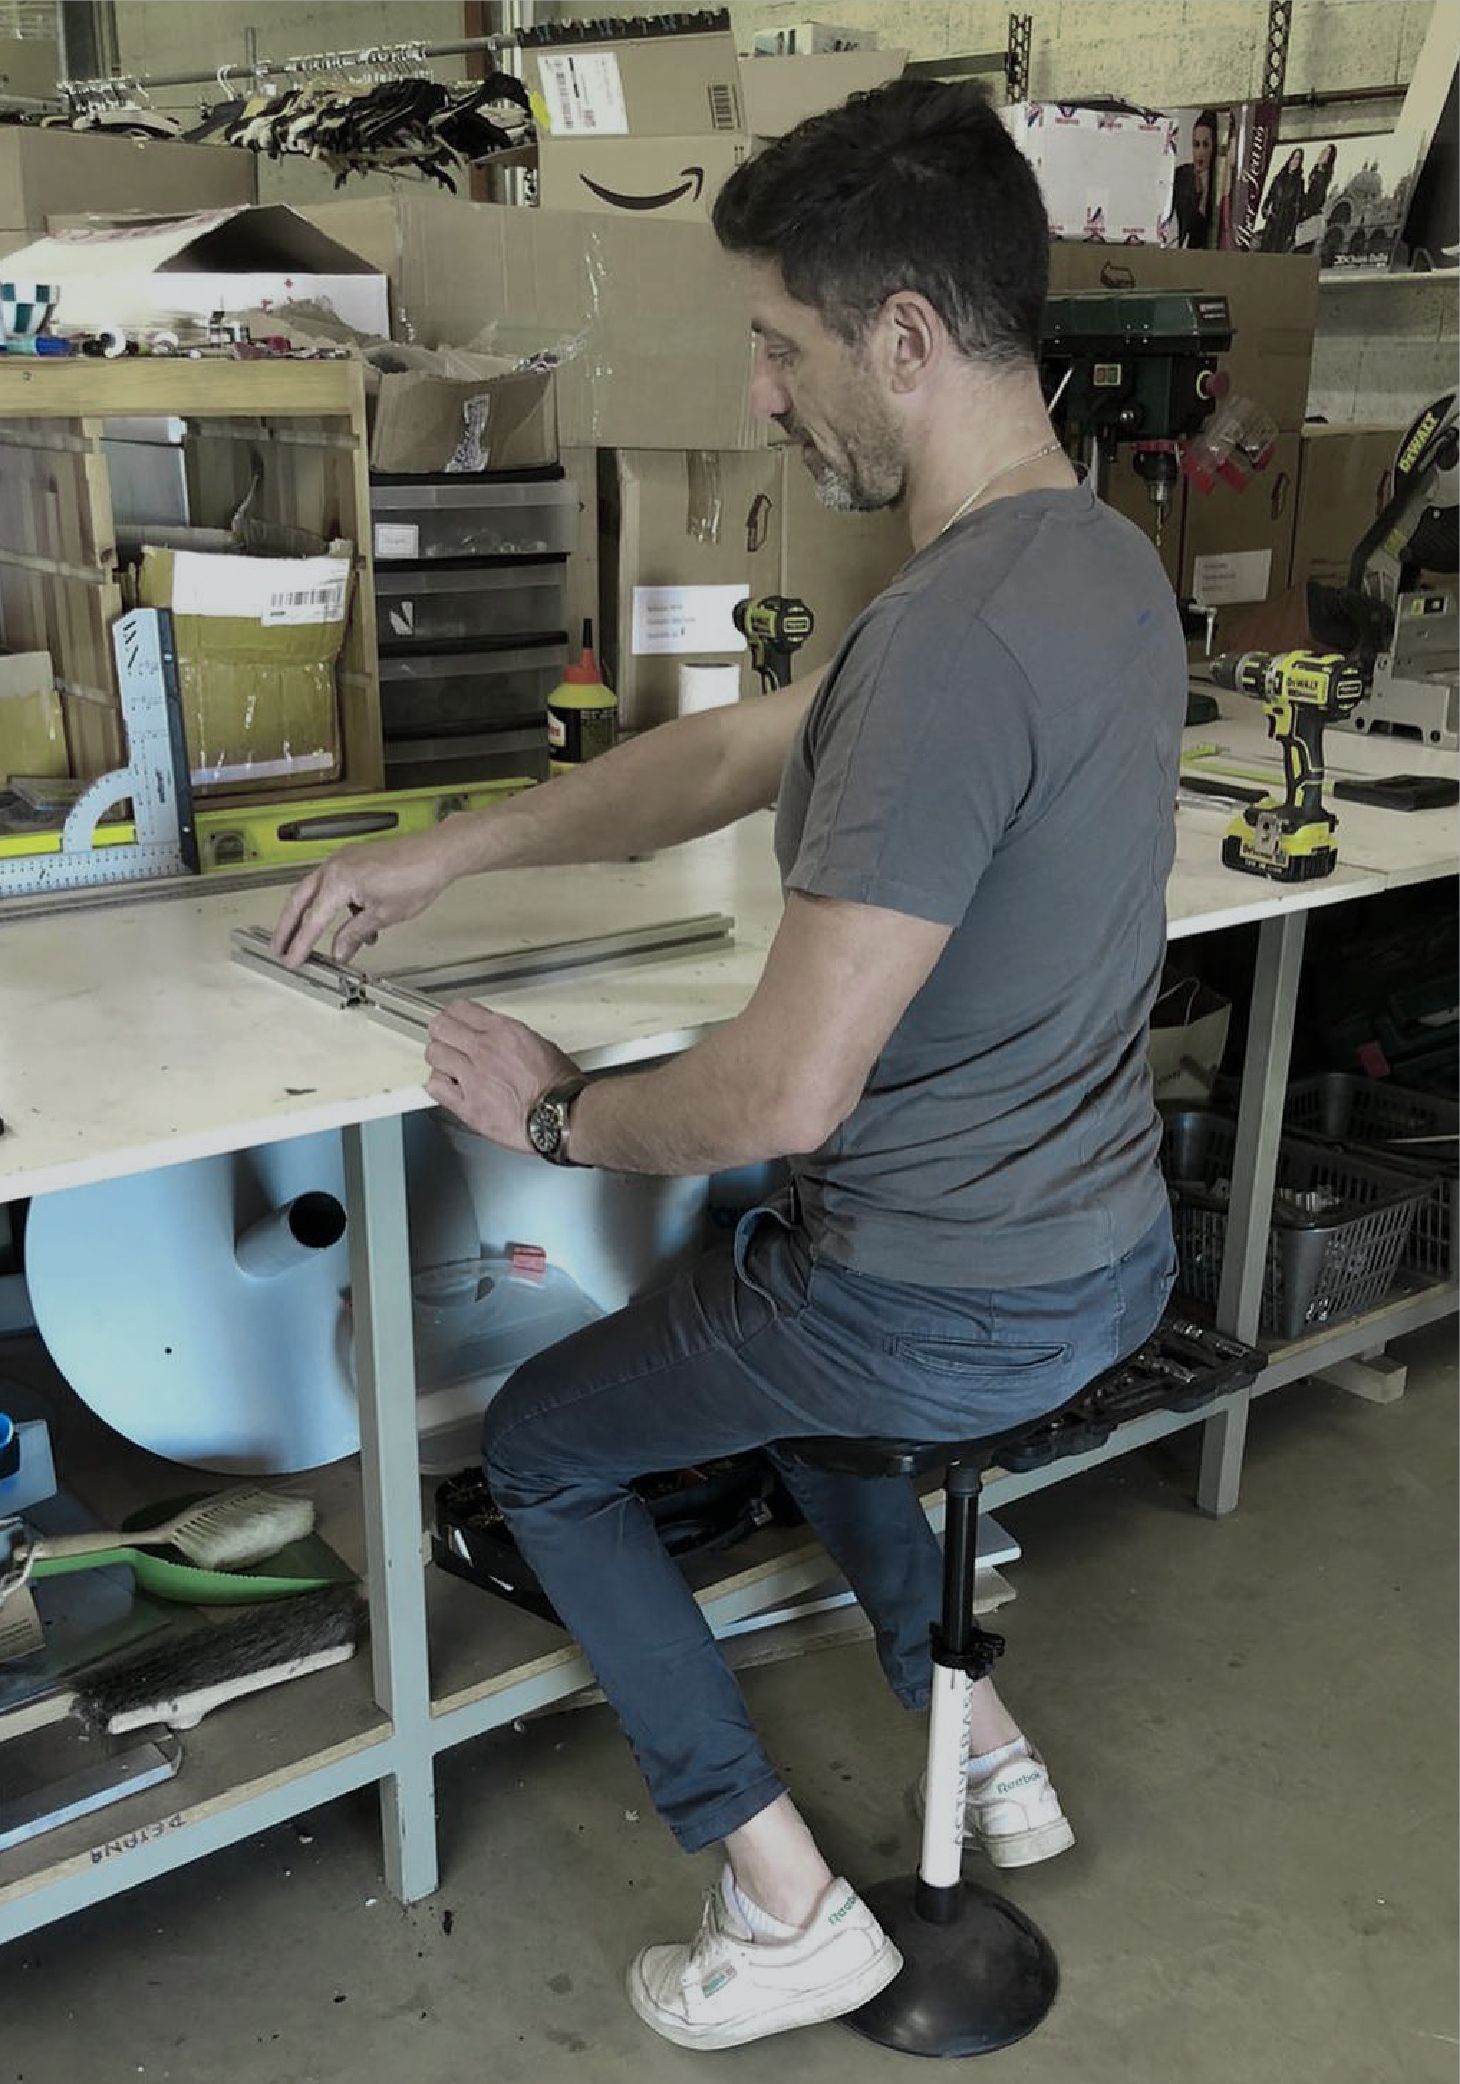 A man uses the ActiveBase ergonomic stool during his professional activities at work, and his posture is good.